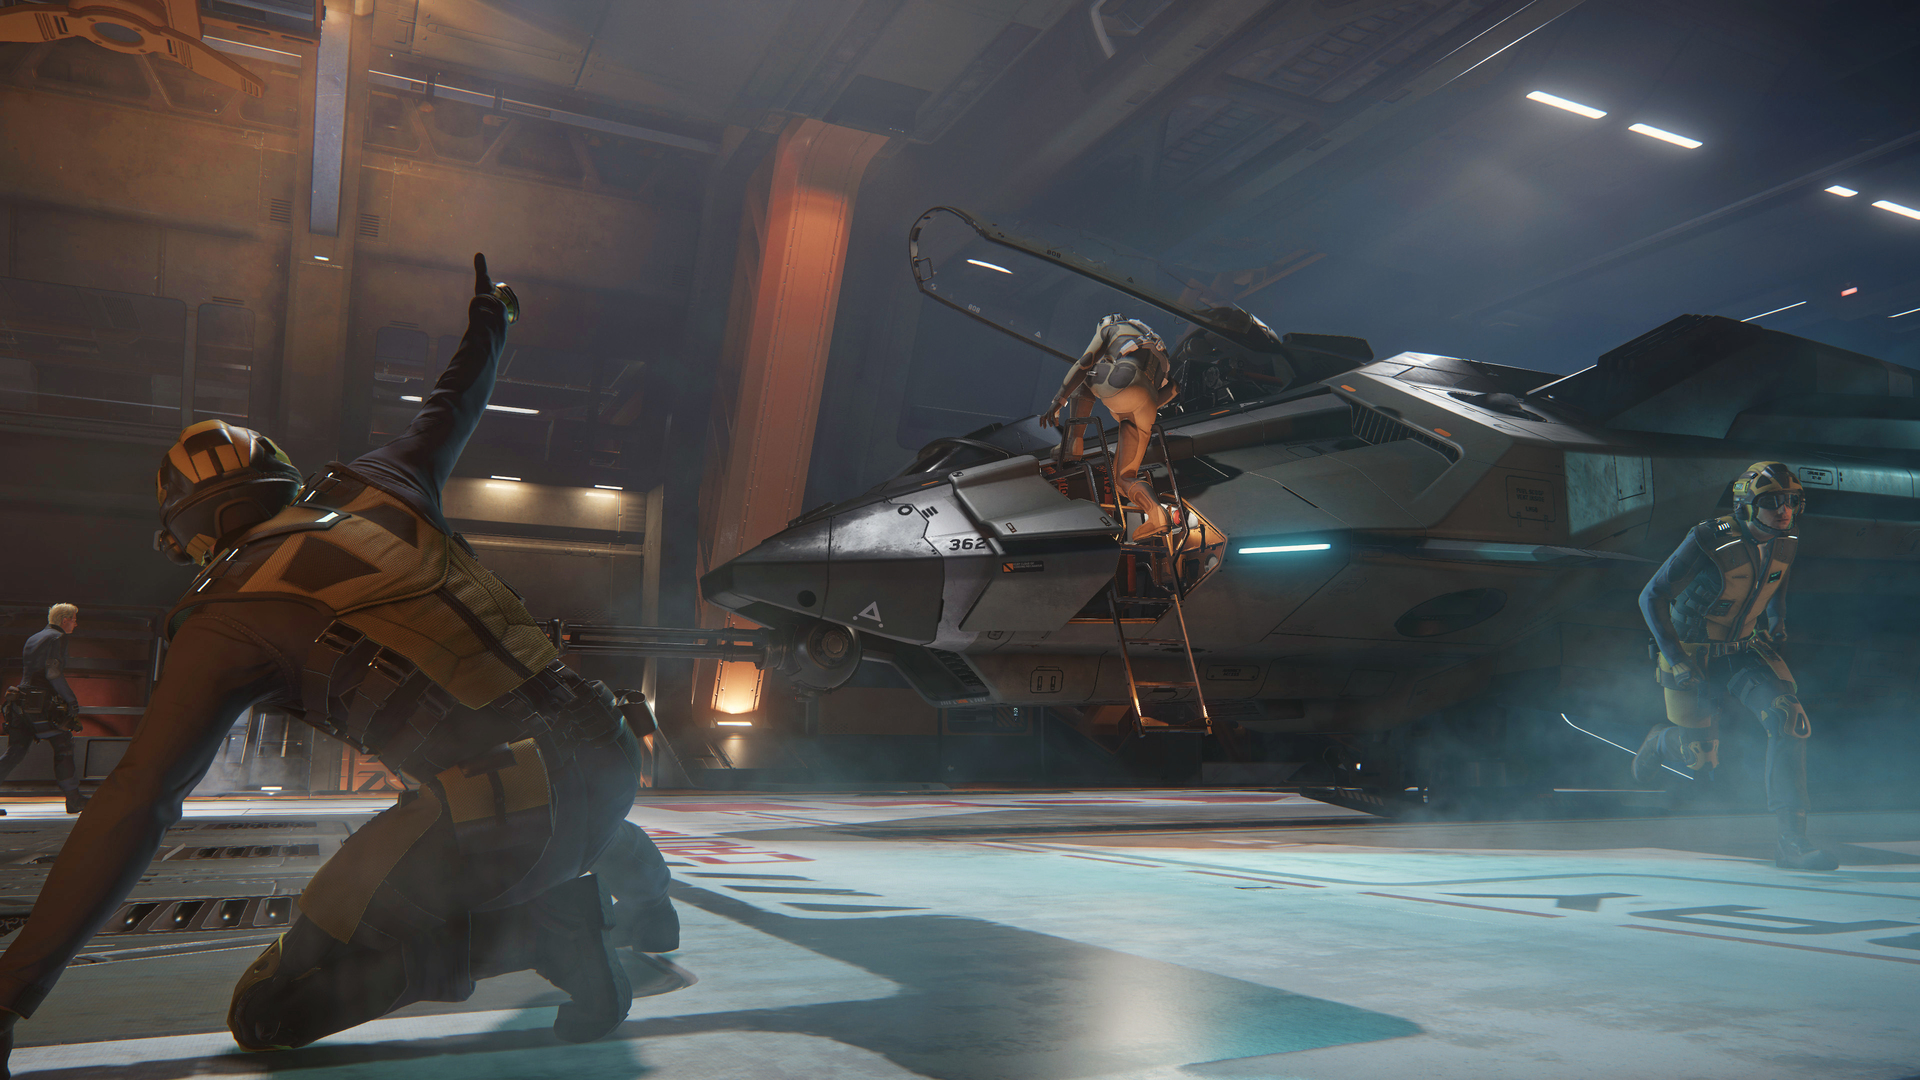 80 LEVEL on X: Star Citizen officially received more than $600M from its  backers in 11 Years. No, it doesn't have a release date yet. Details:   #starcitizen #games #videogames   /